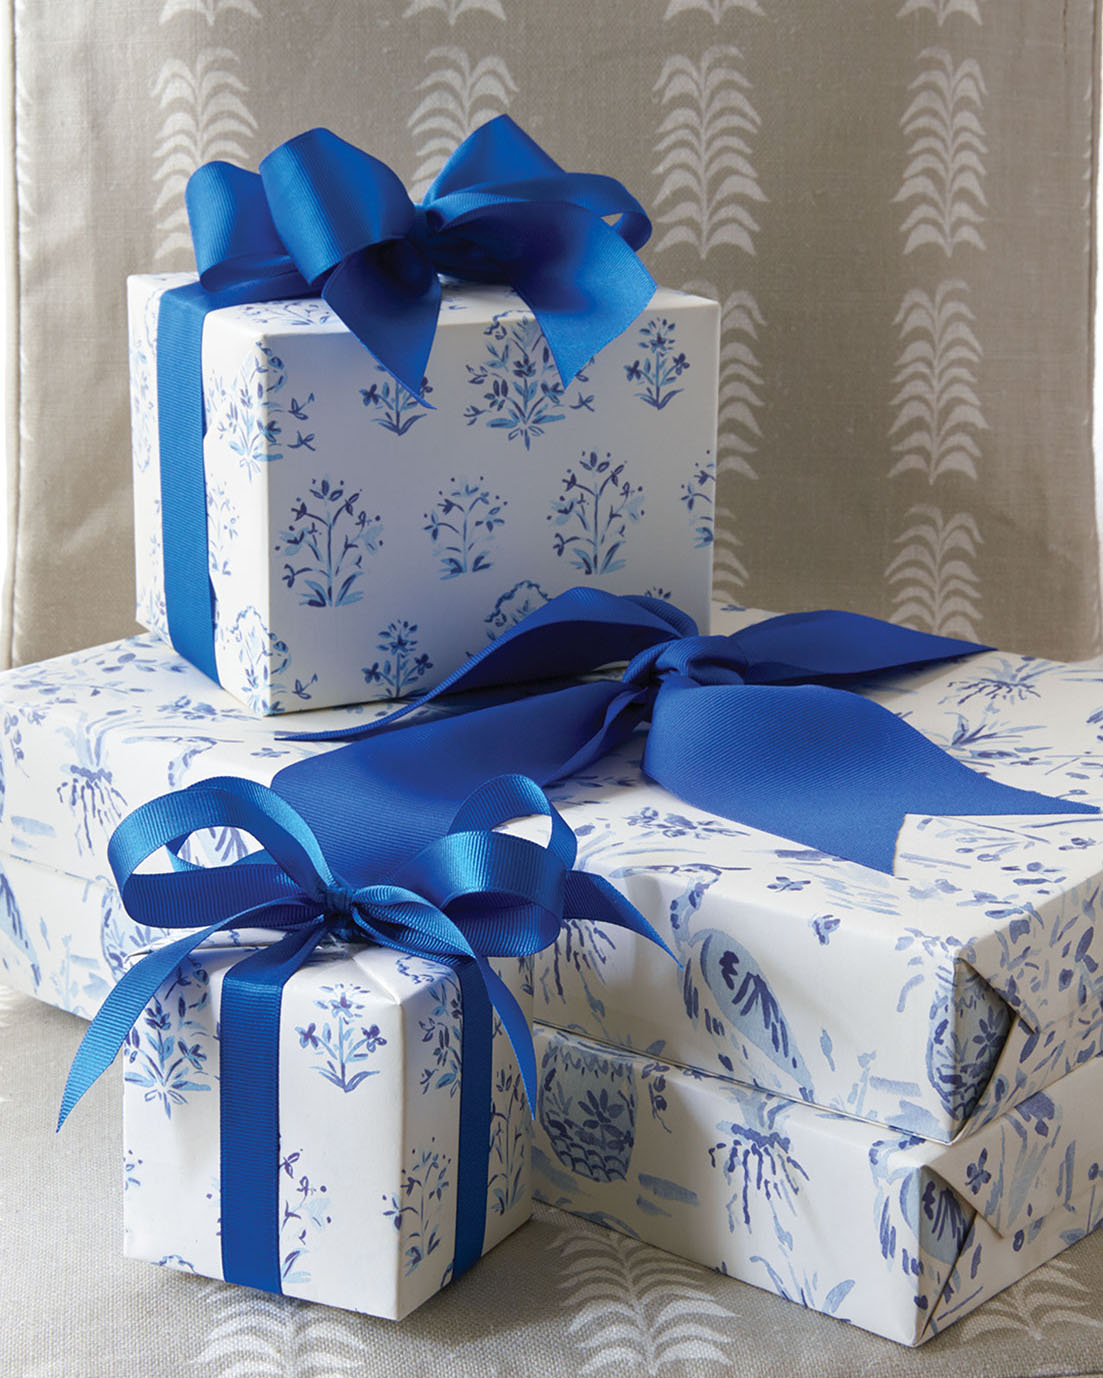 Gift boxes wrapped in blue and white paper and tied with blue ribbon